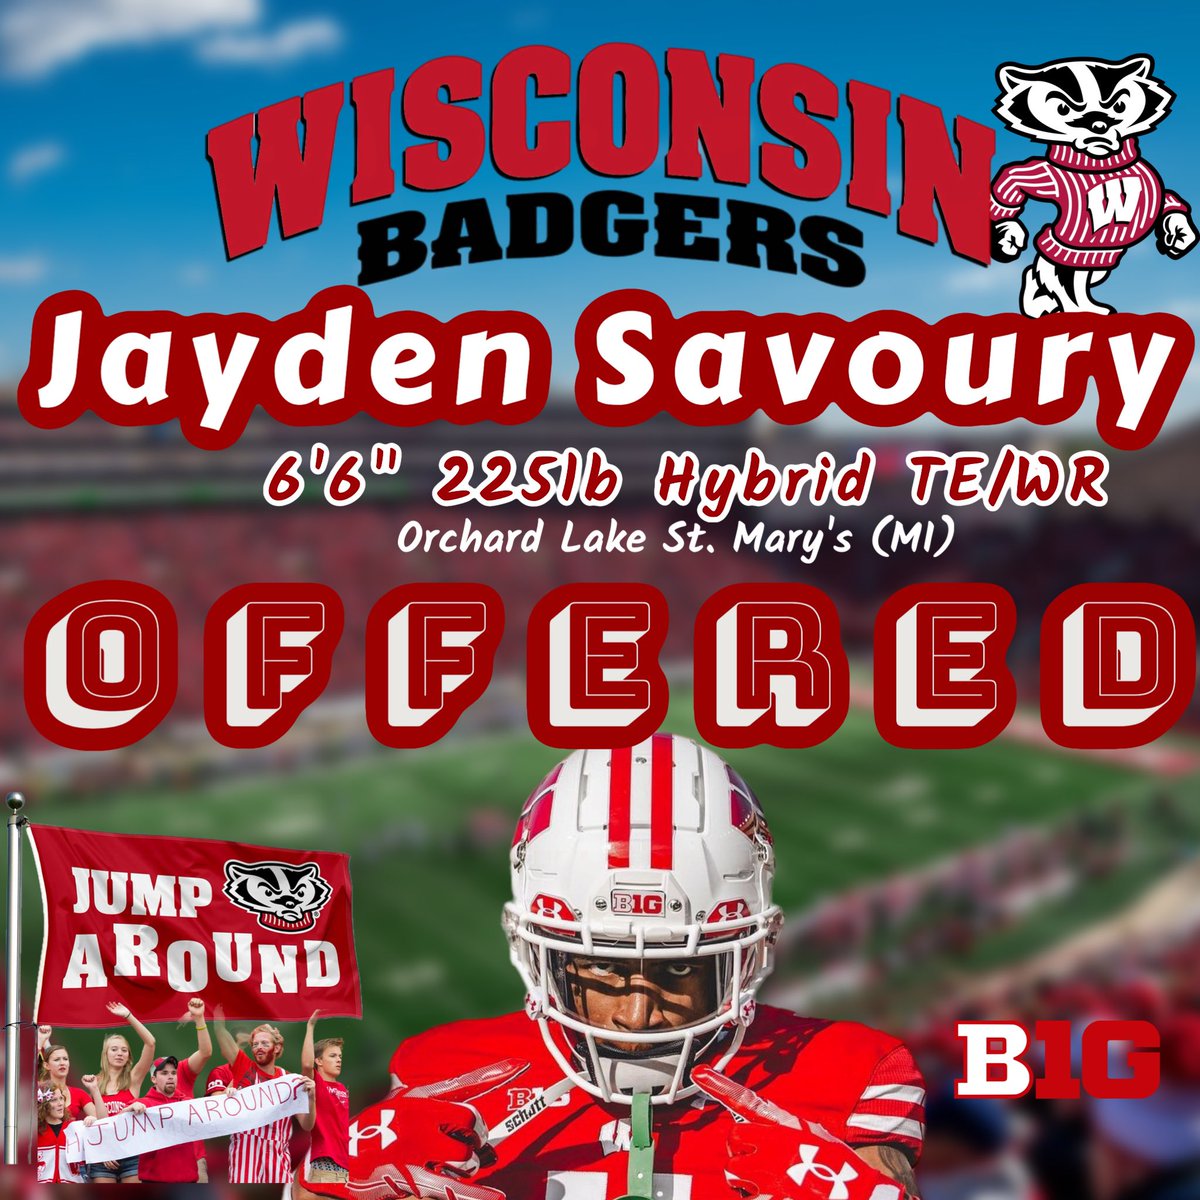 Orchard Lake St Mary's (MI) Hybrid TE/WR Jayden Savoury who after a Unofficial Visit to @BadgerFootball Spring Practice received an offer to attend the University of Wisconsin. We appreciate Head Coach Fickell, TE Coach Letton @NateLetton and recruiting staff. #badgersfootball